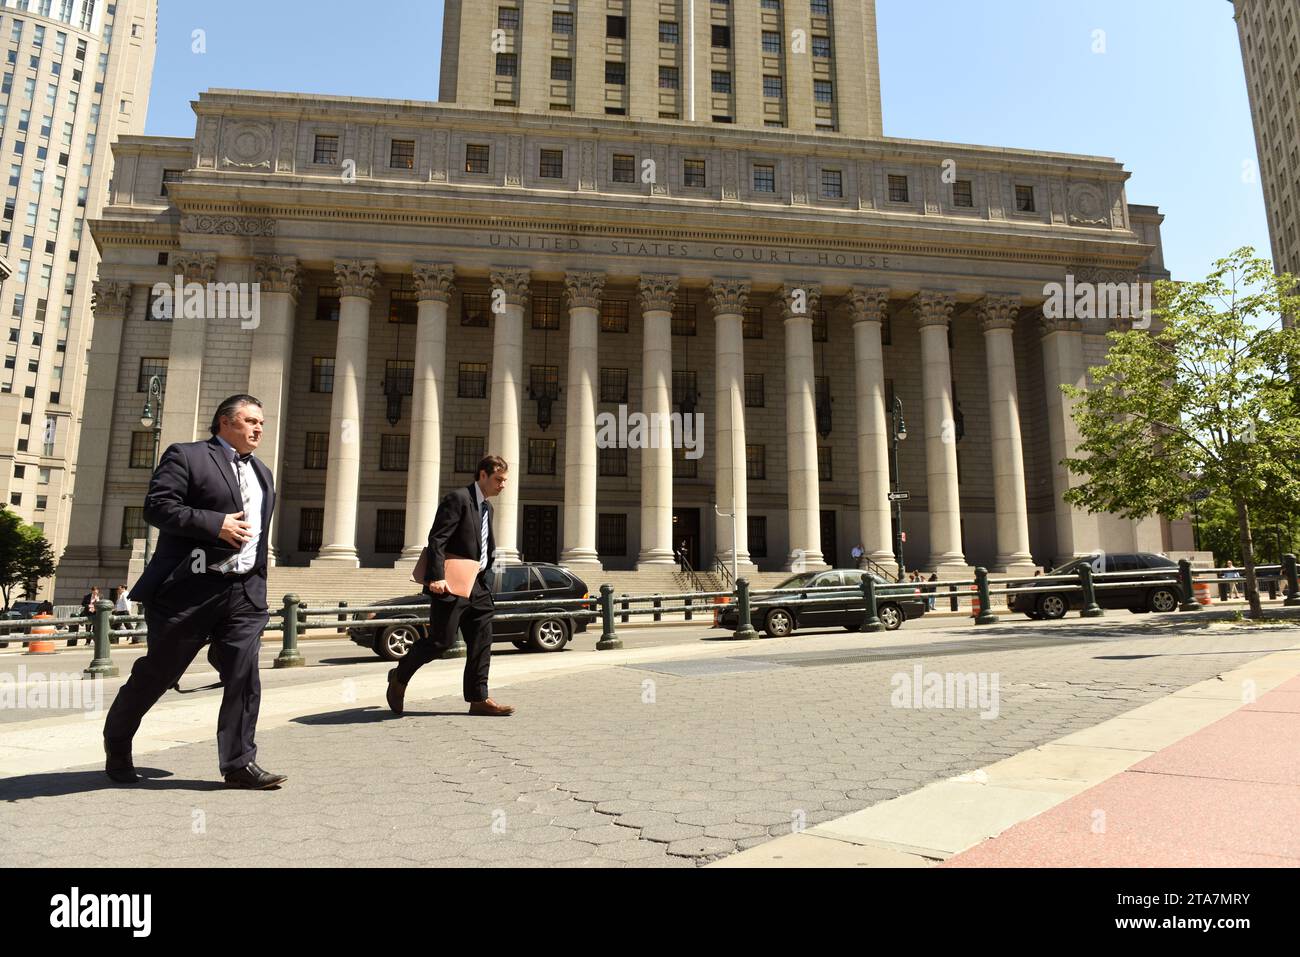 New York, USA - 24. Mai 2018: Menschen in der Nähe des Thurgood Marshall Courthouse. United States Court House in NYC Stockfoto